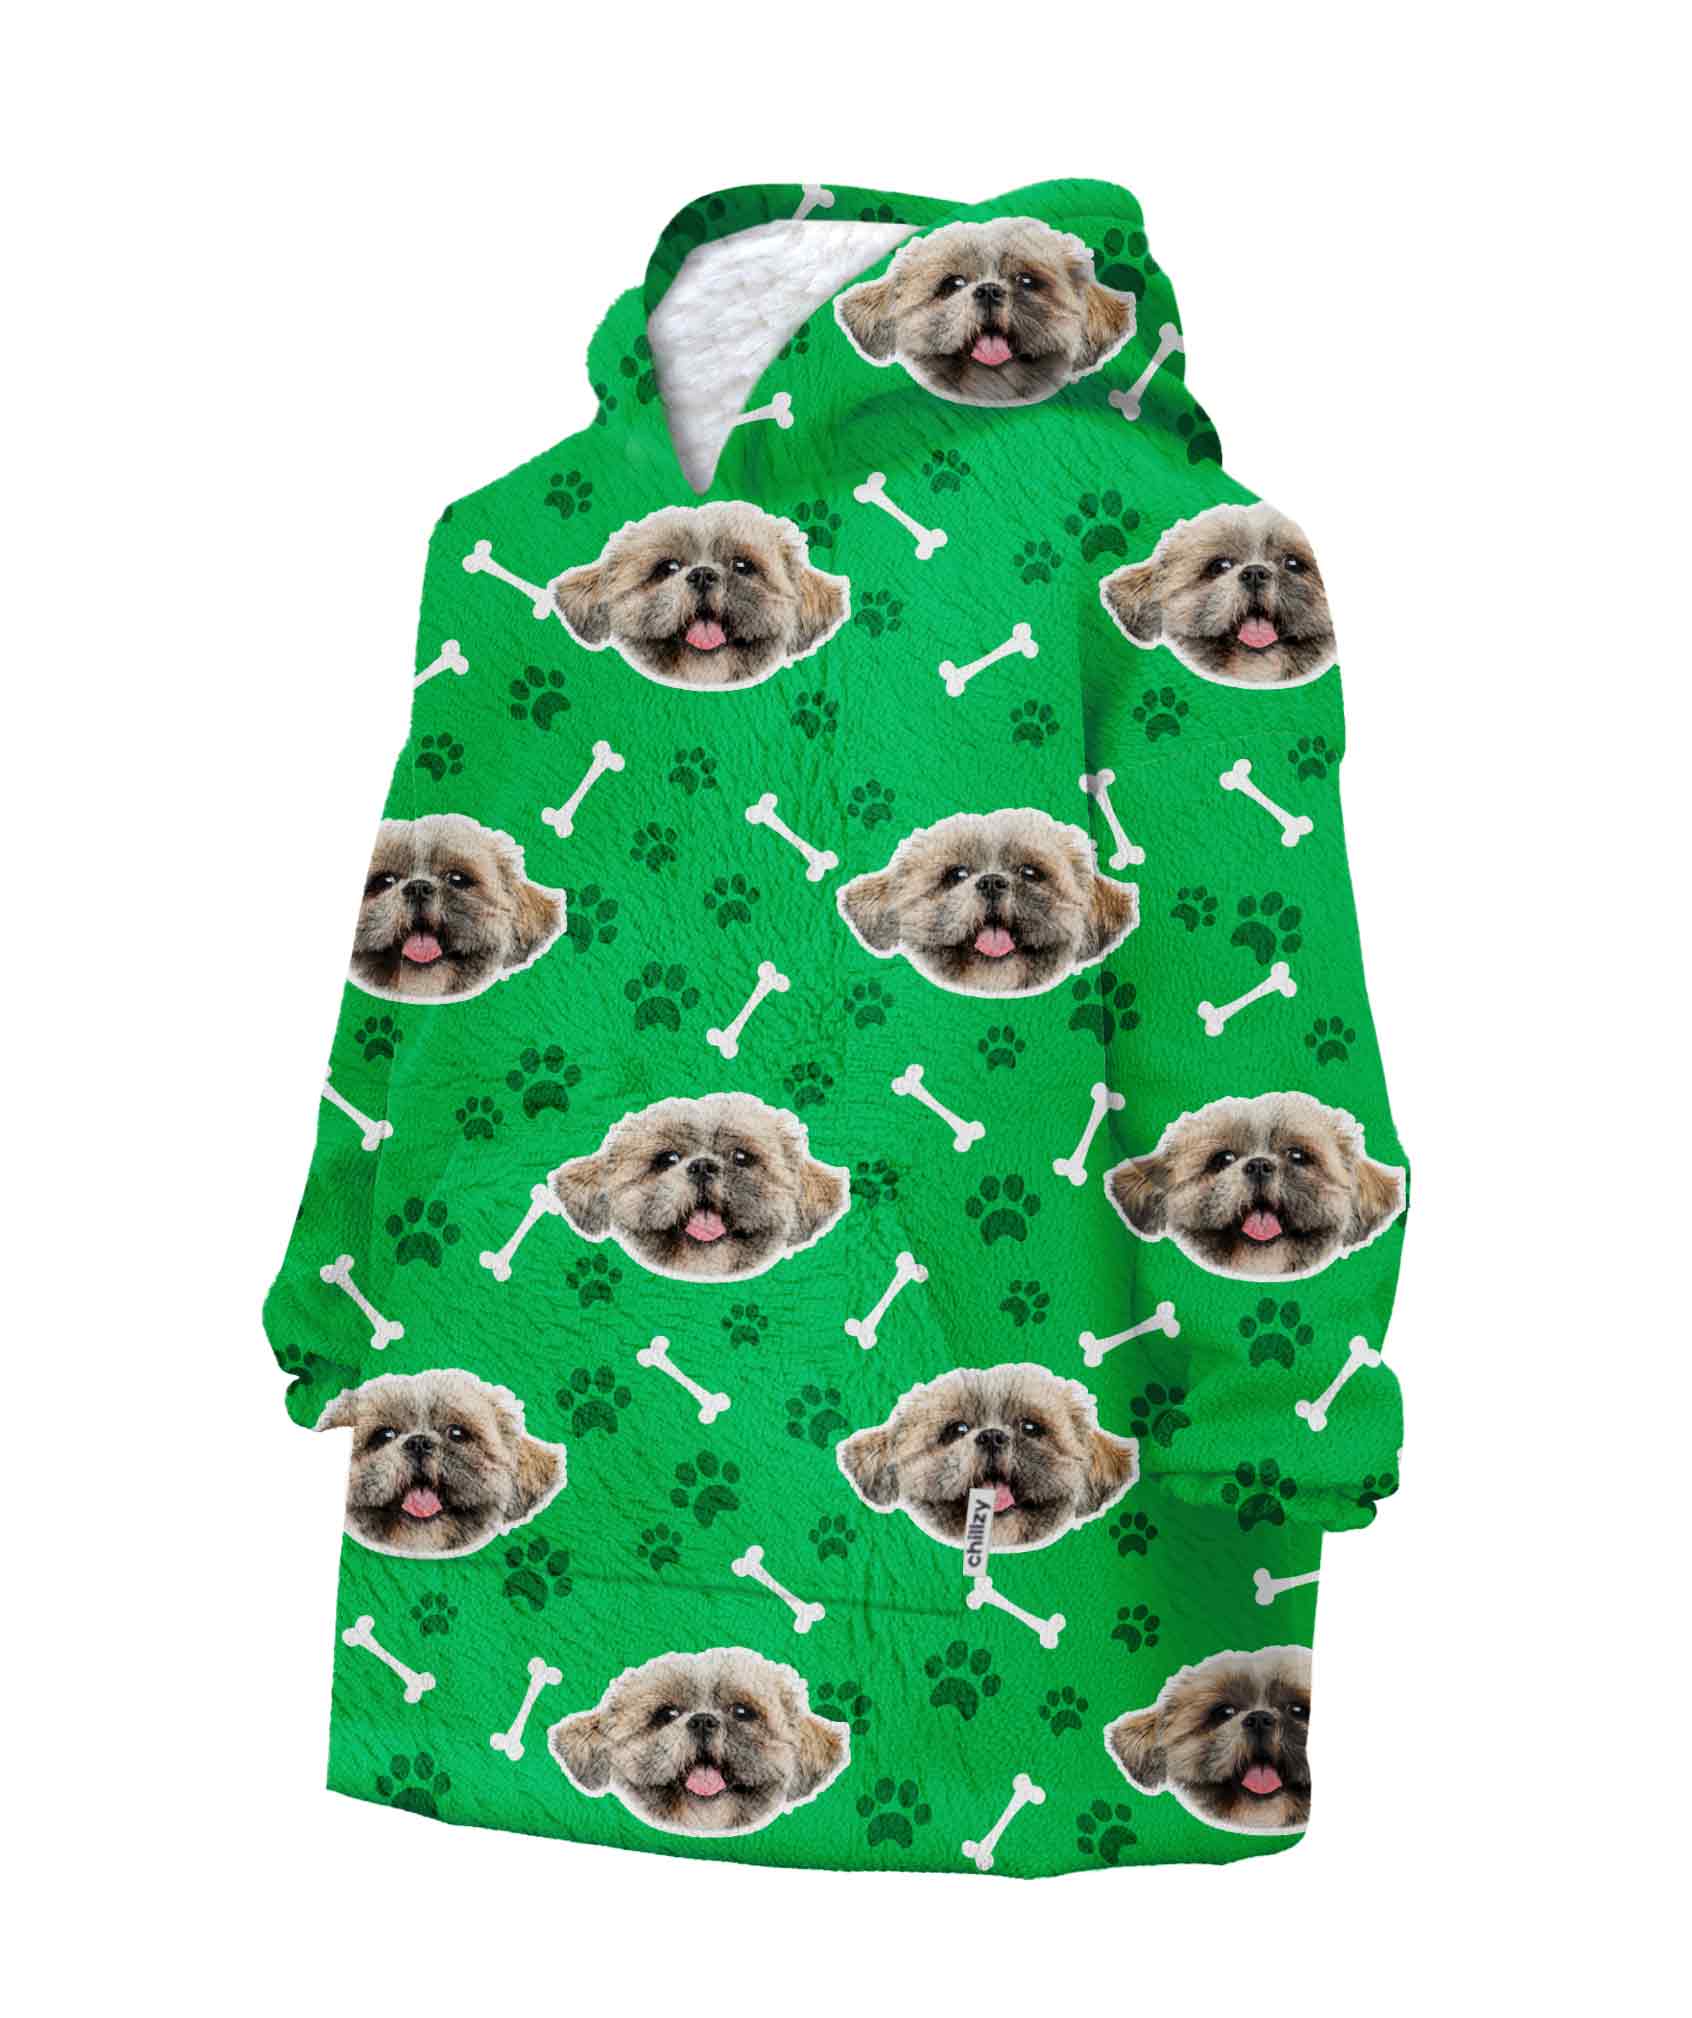 Your Dog Chillzy Kids Hoodie Blanket